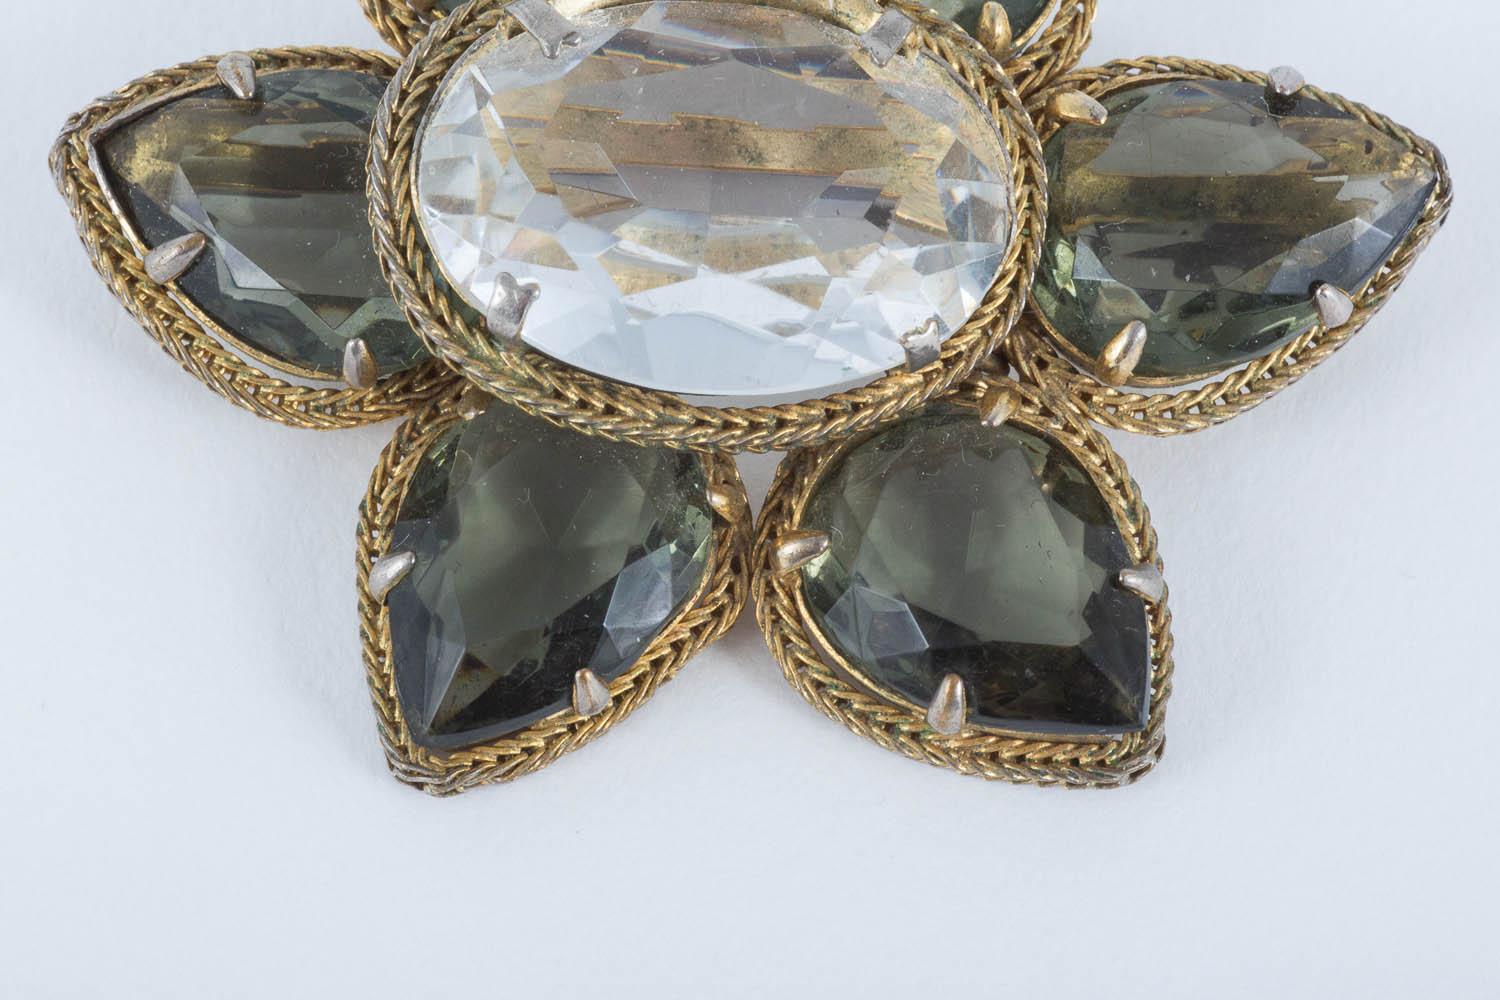 This is a lovely Christian Dior brooch in a very 'grown up' colour combination. The grey petals and large clear oval glass 'stones' sit so well with the lovely antique gilded metal surround. The brooch is signed and dated.
A great addition to any